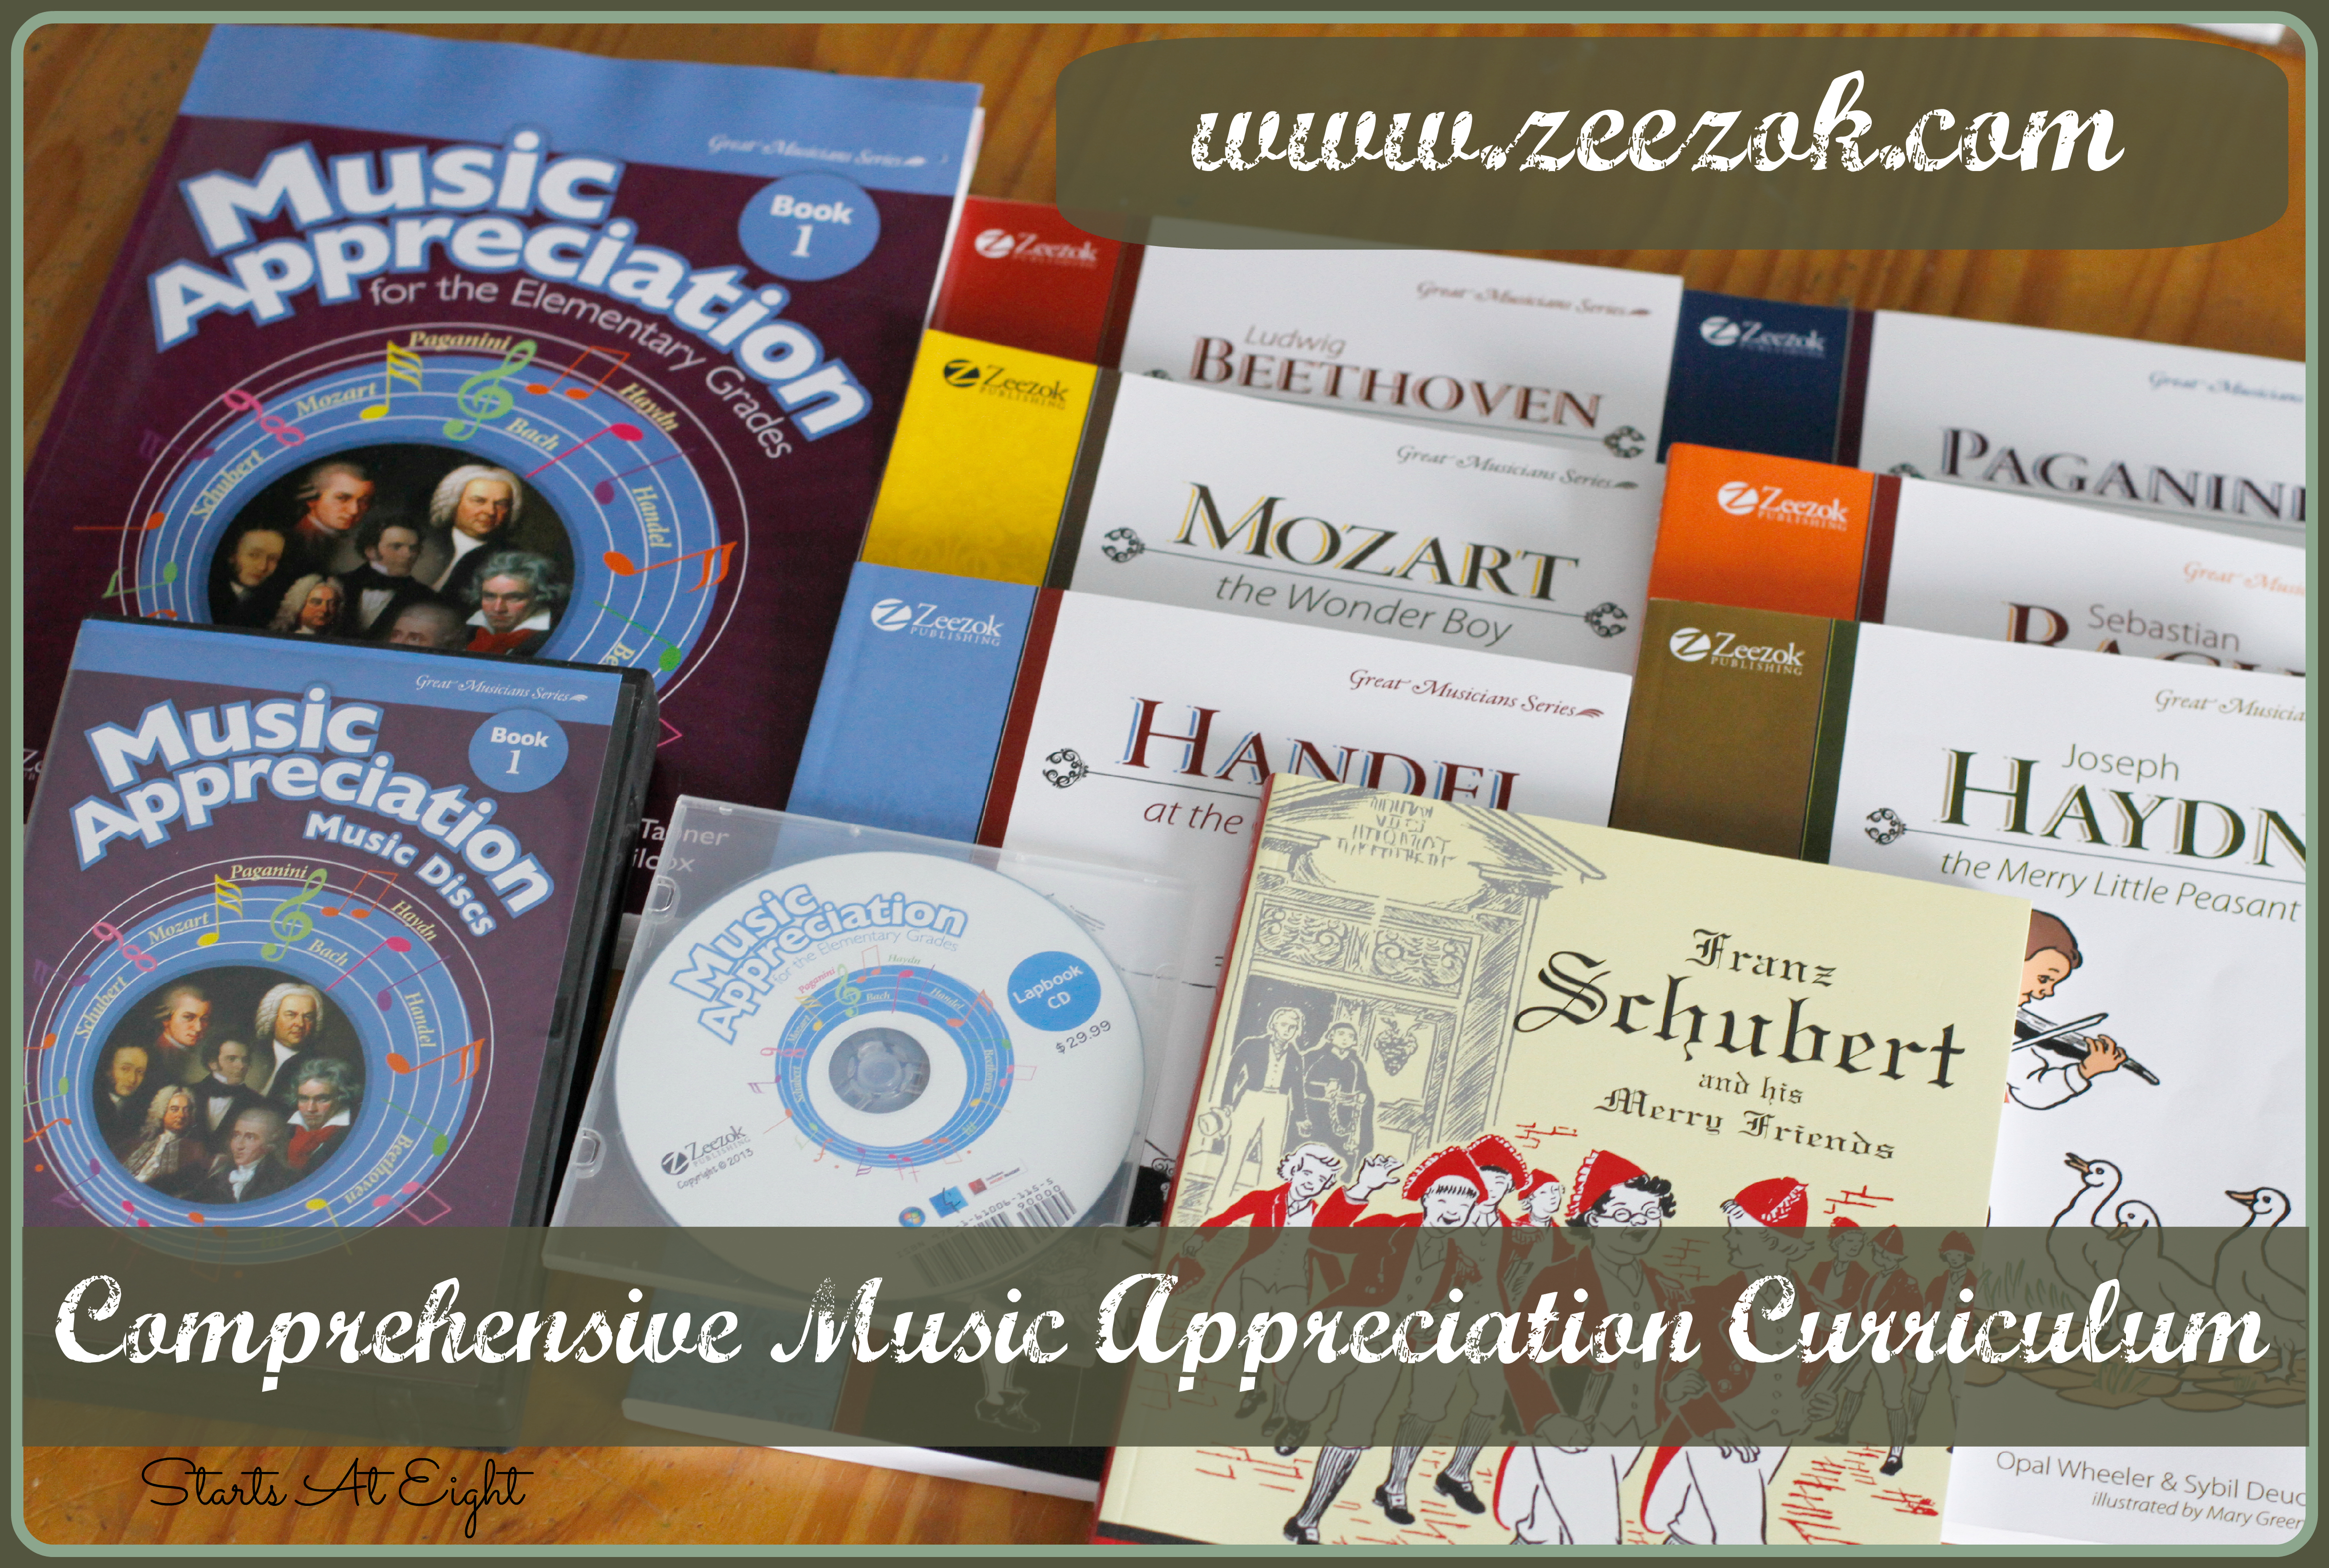 Comprehensive Zeezok Music Appreciation Curriculum Review from Starts At Eight